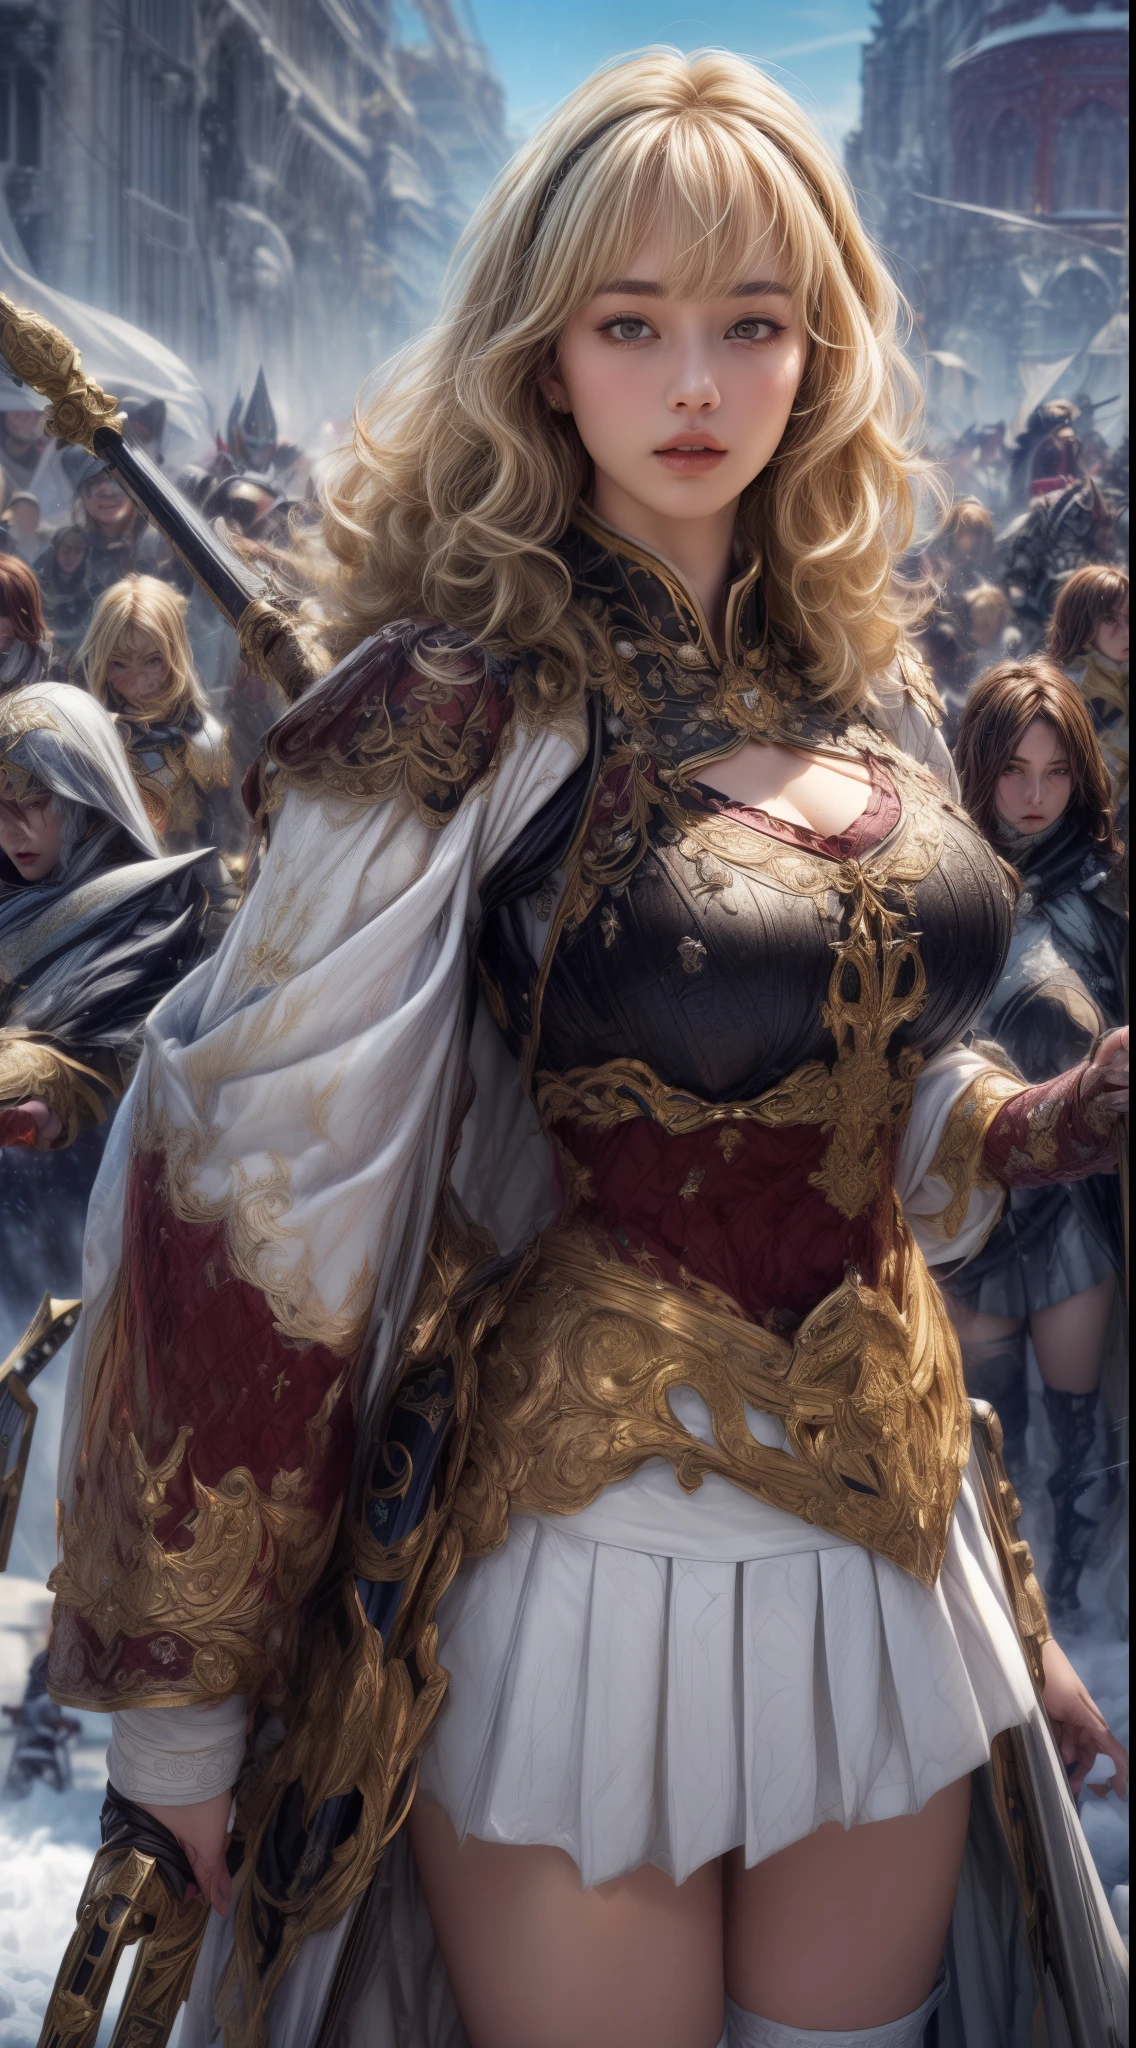 Very beautiful woman、Slender women、(Detailed face)、Realistic Skin、((holy knight)), ((Pearl White Armor))、((((Black armor with very fine and intricate decoration:1.1))))、((Delicate photo))，(Girl Astepeace RAW Photo Details:1.25), (highest quality:1.6), (超A high resolution:1.5), (Realistic:1.75), 8K resolution, Canon EOS R5, 50mm, Absurd, Ultra-detailed,Cinema Lighting,((battlefield))、((battle))、(((White skirt with embellishments)))、Thigh-high socks、Shin Guards、((Blonde))、((Curly Hair))、((Drill Hair))、((Wavy short hair with bangs,))、Get six-pack、Cape、Beautiful Armor、(((Has a huge weapon)))、(In combat)、The wind is blowing、((Symmetrical Armor))、((((Blizzard))))、(((Leading a large group of knights:1.2)))、Banner、